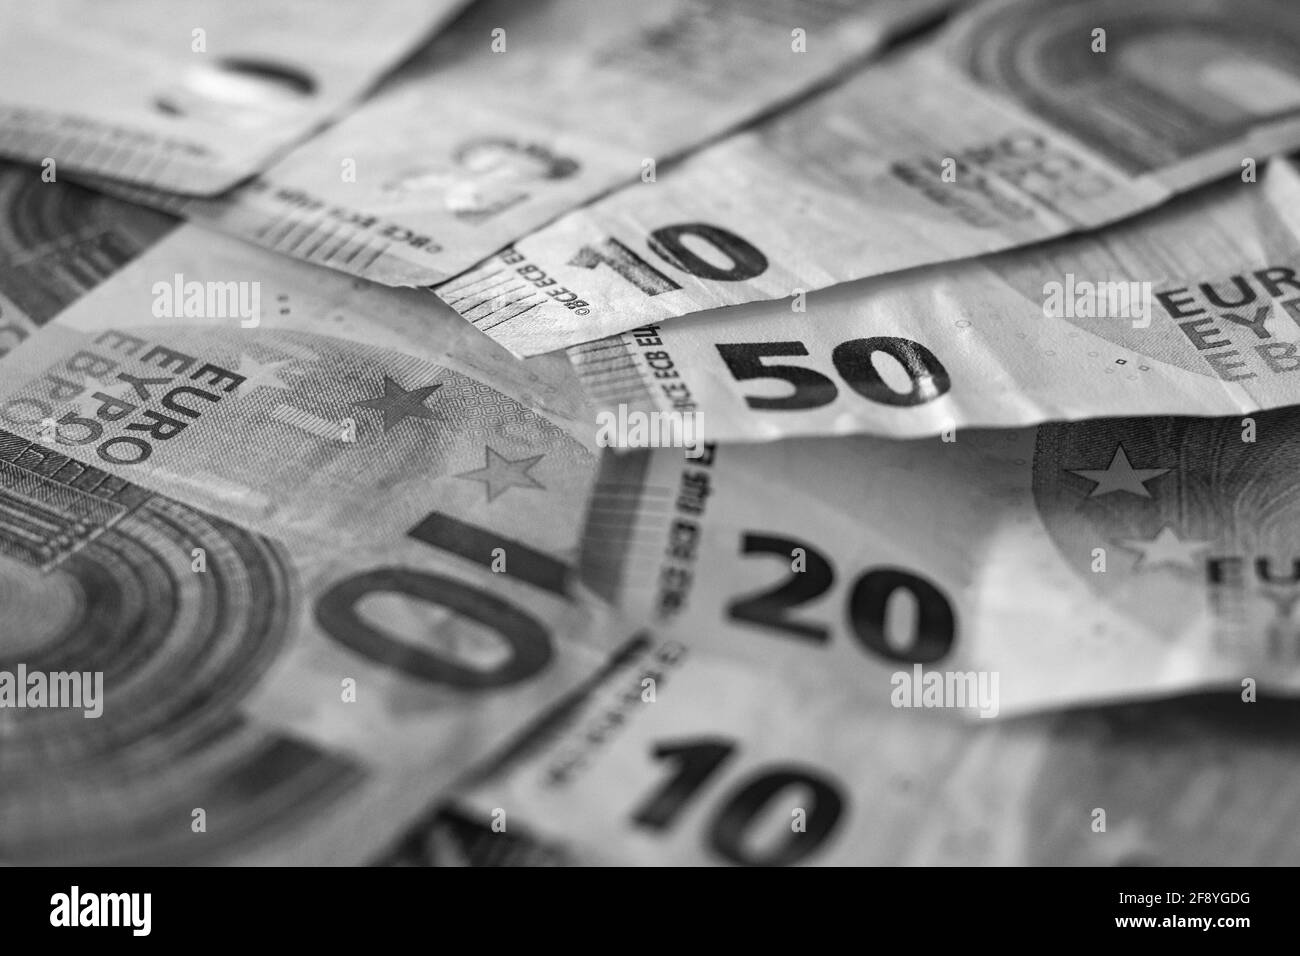 Euro banknotes. table covered with banknotes. Stock Photo